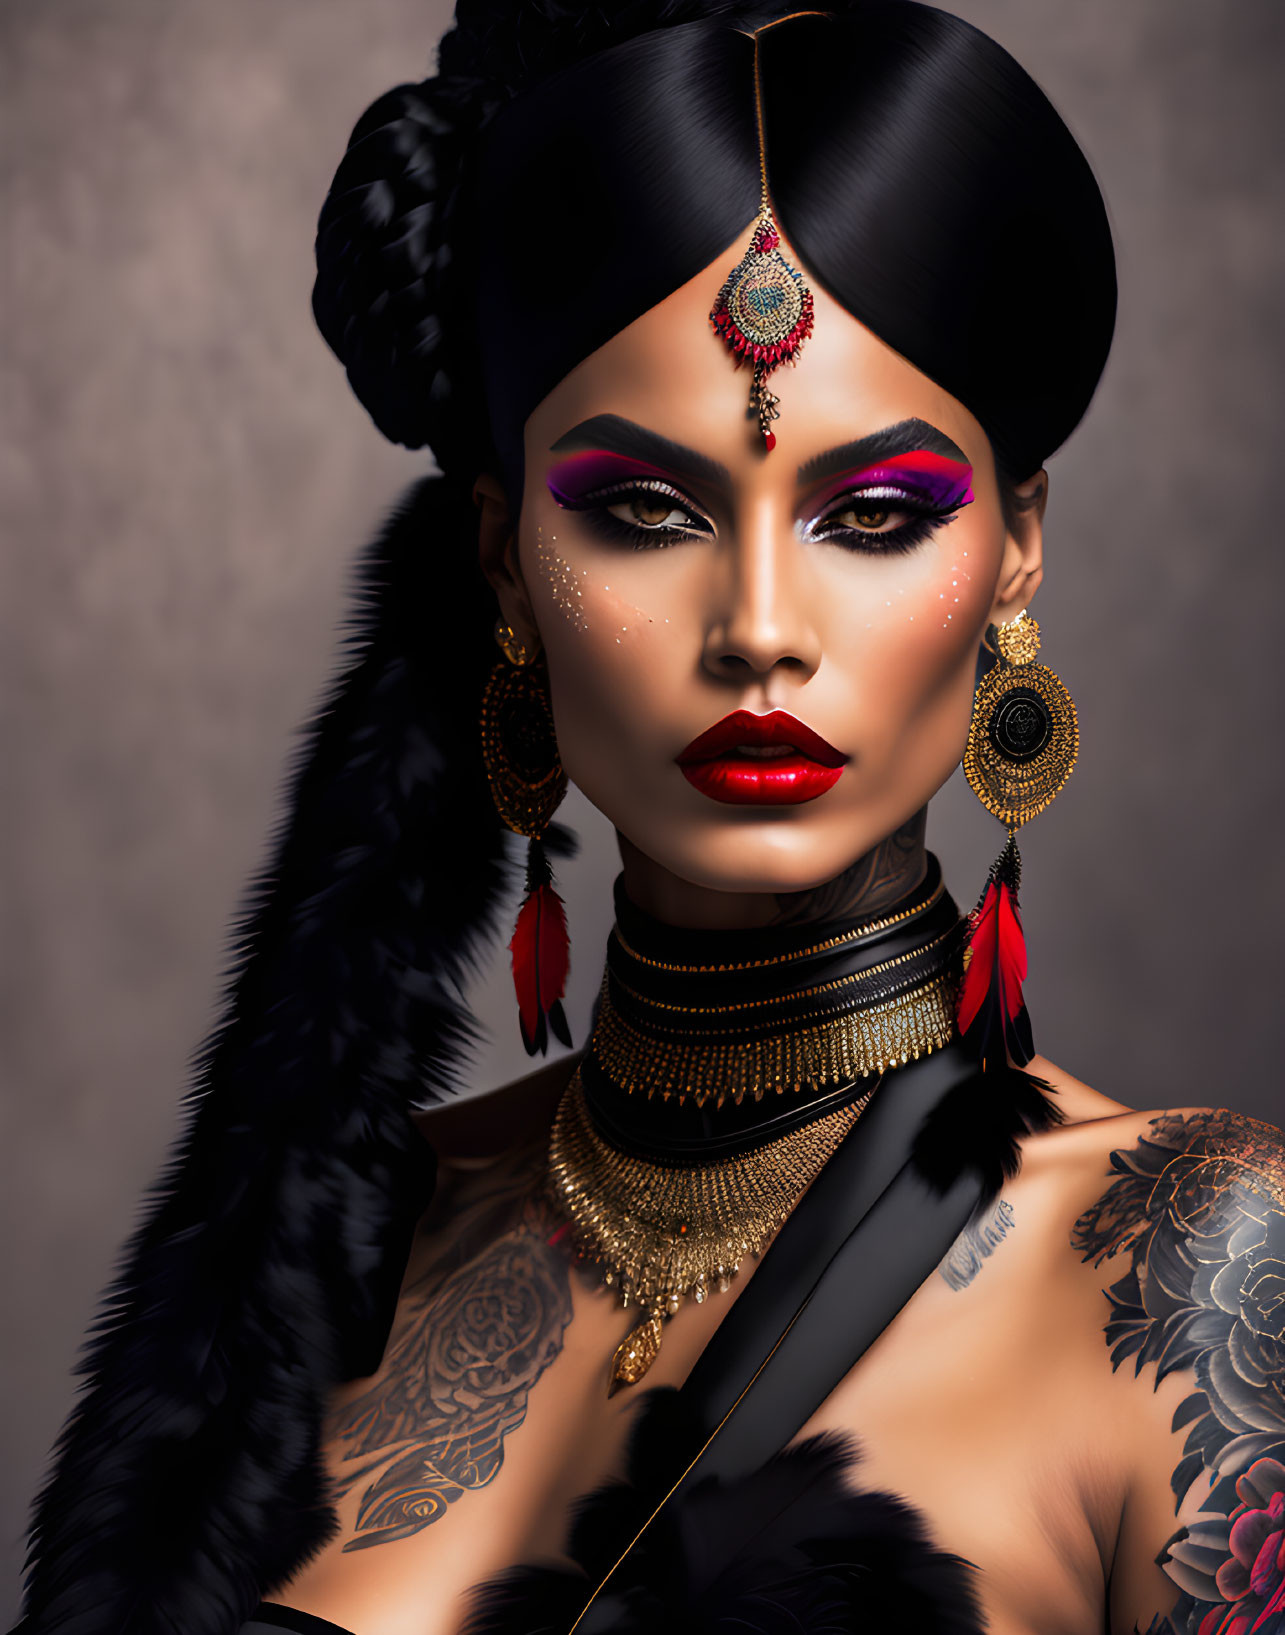 Portrait of woman with dramatic makeup, ornate jewelry, sleek updo, tattoos, and feathered